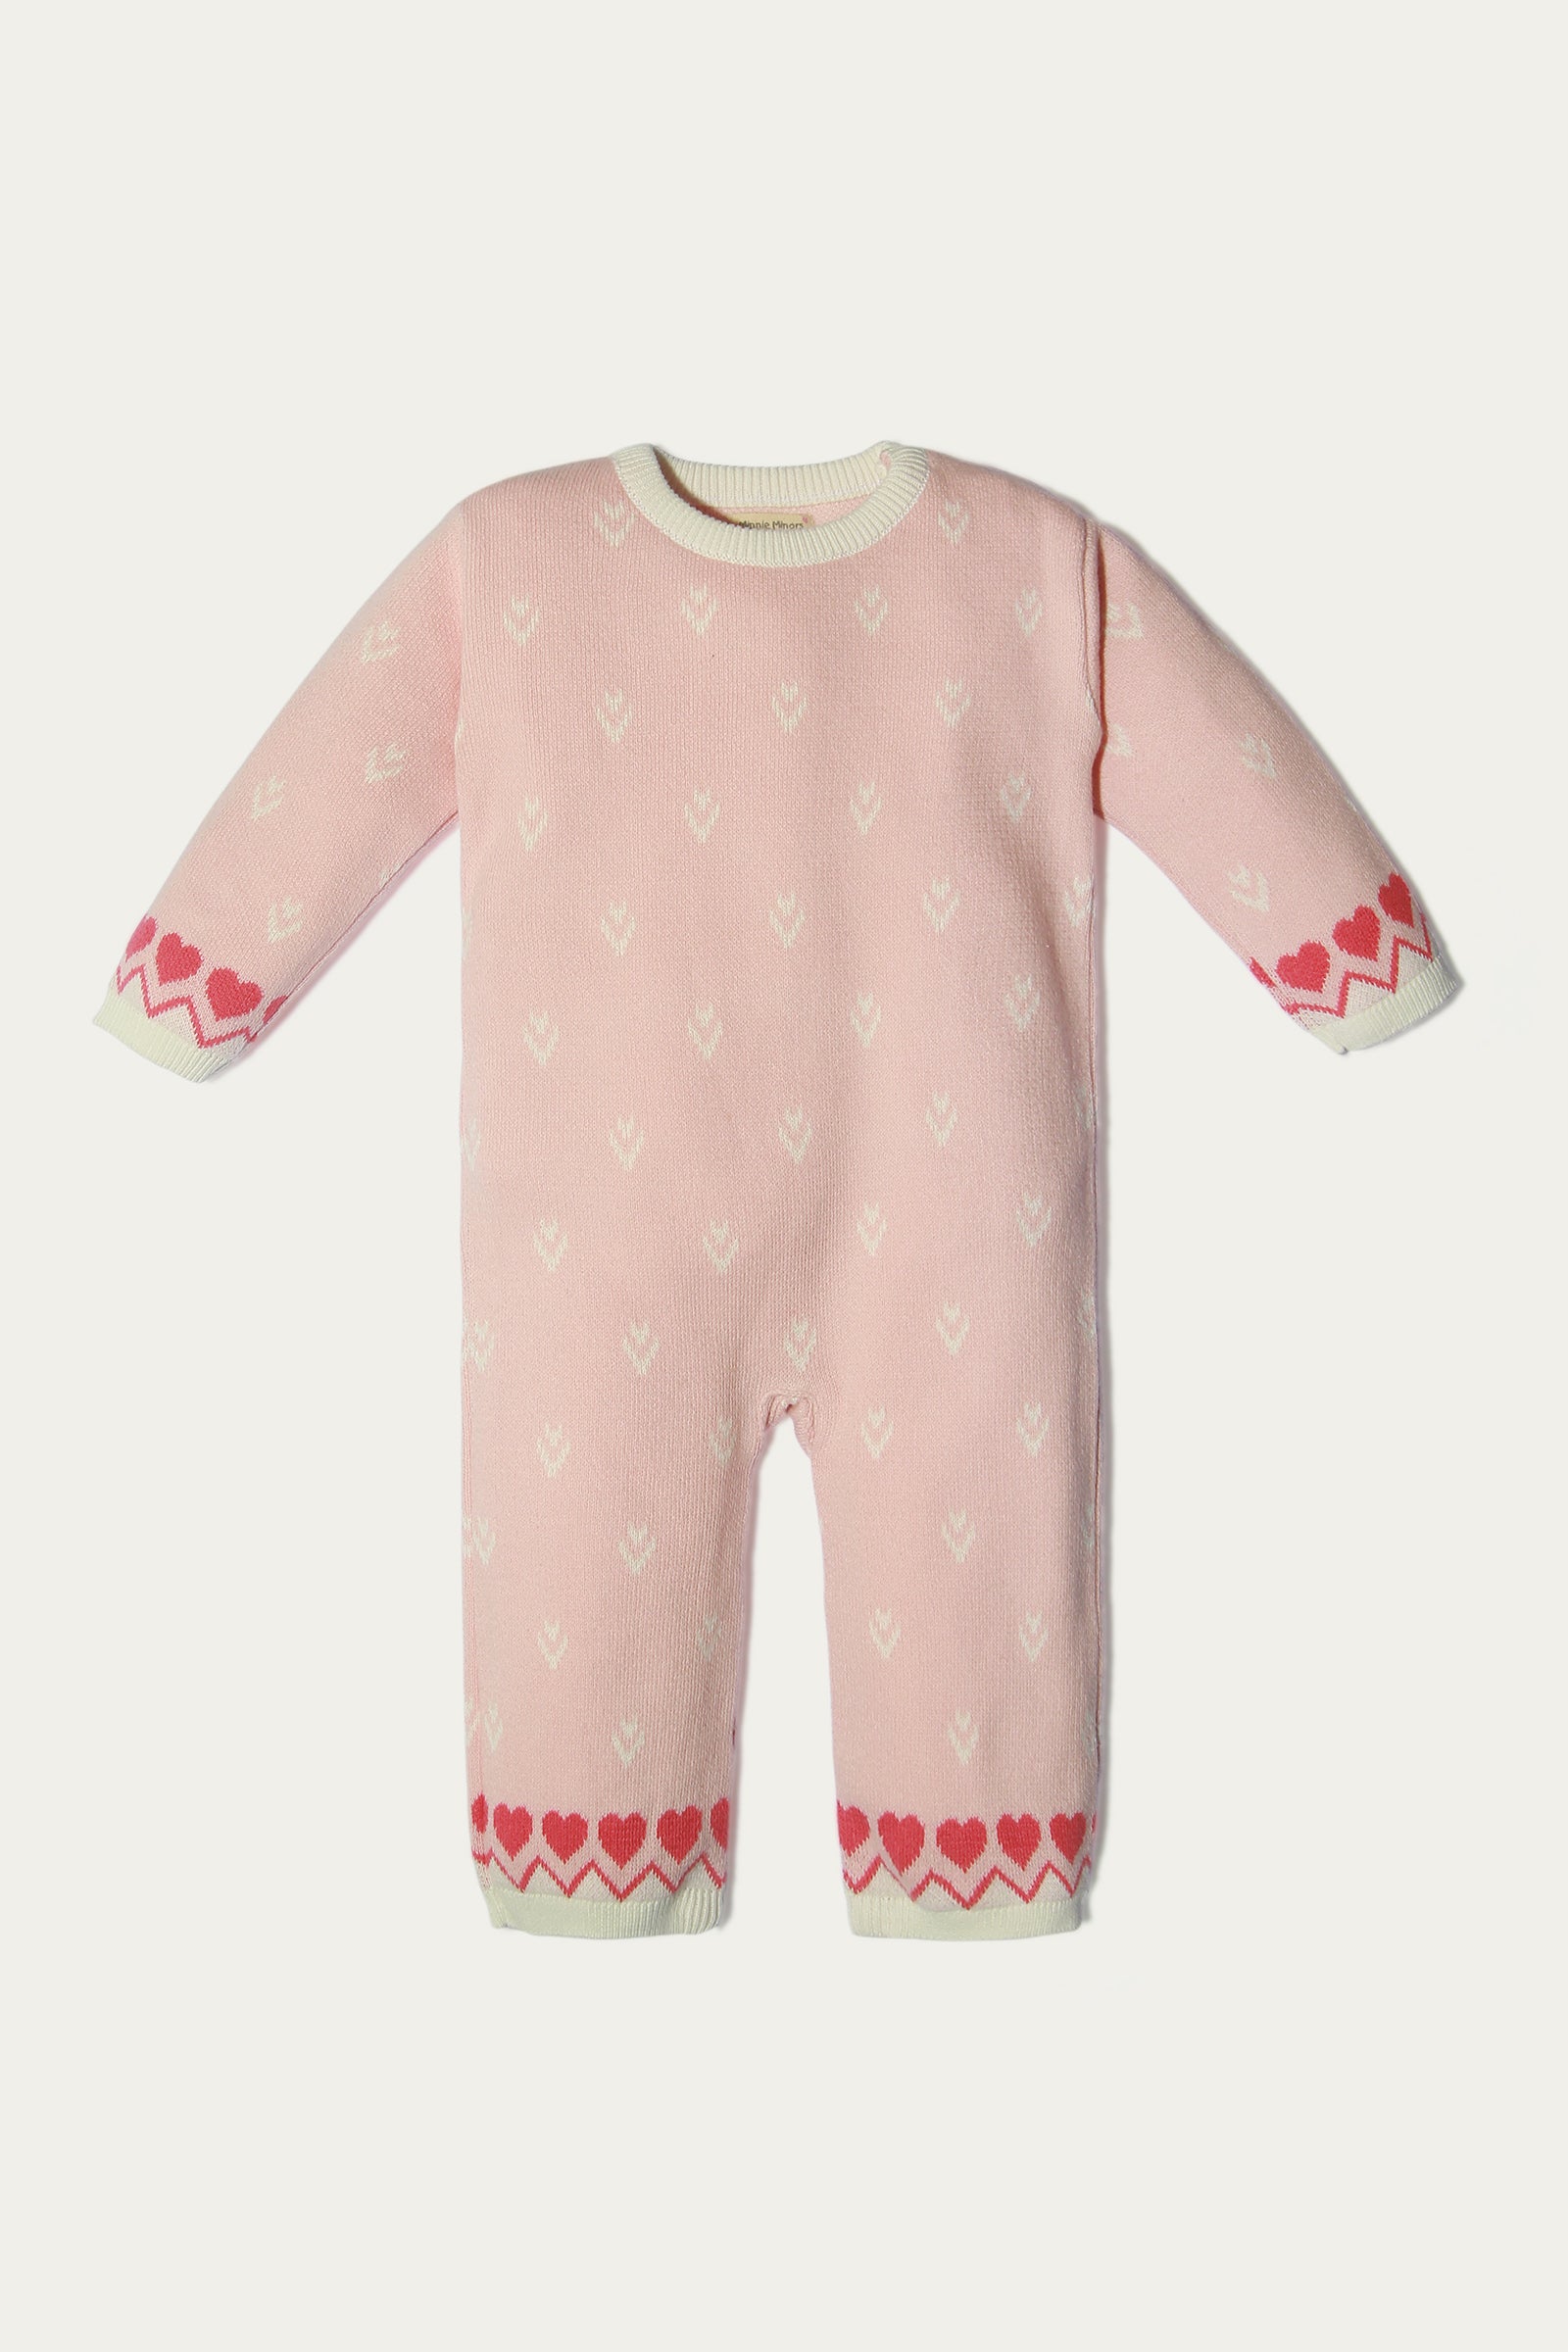 Minnie Minors | Shop Online for Babies, Toddlers & Kids